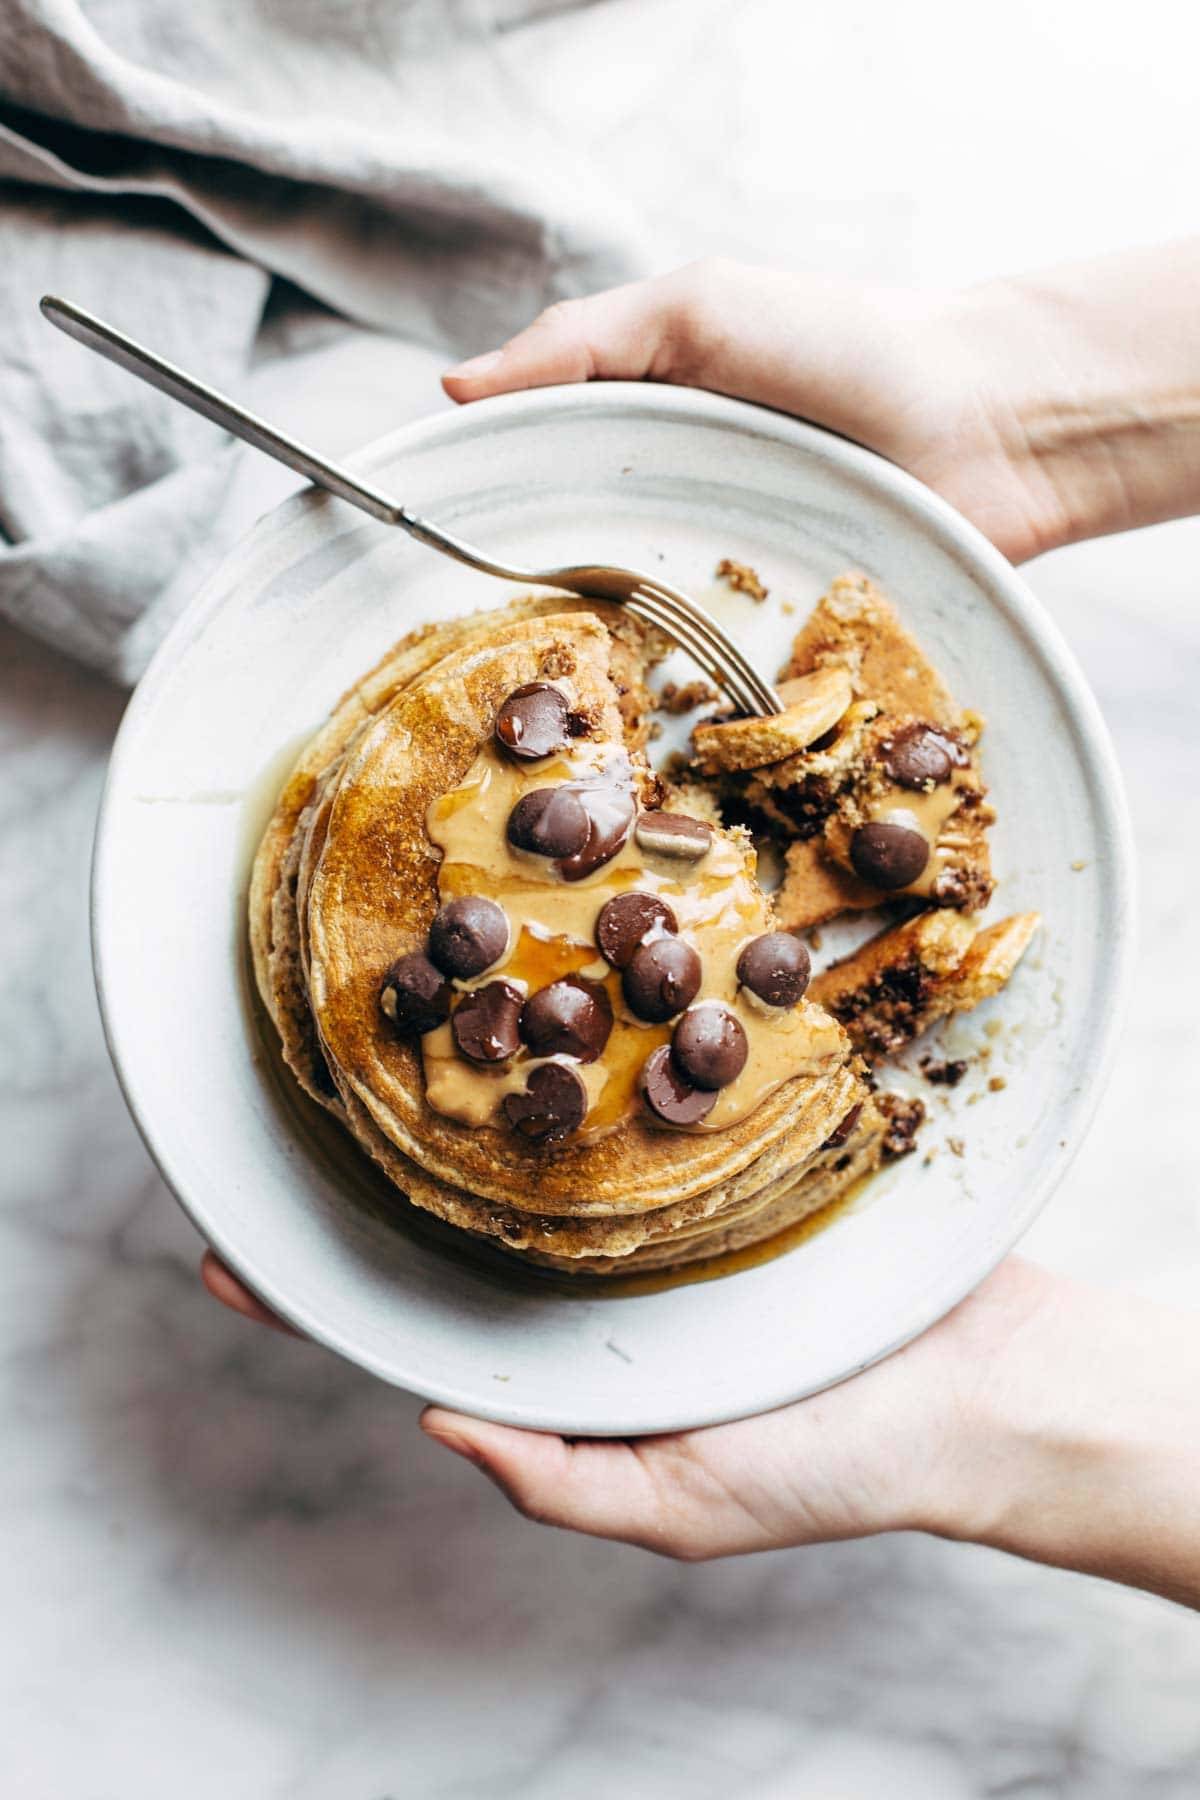 The Best Protein Pancakes